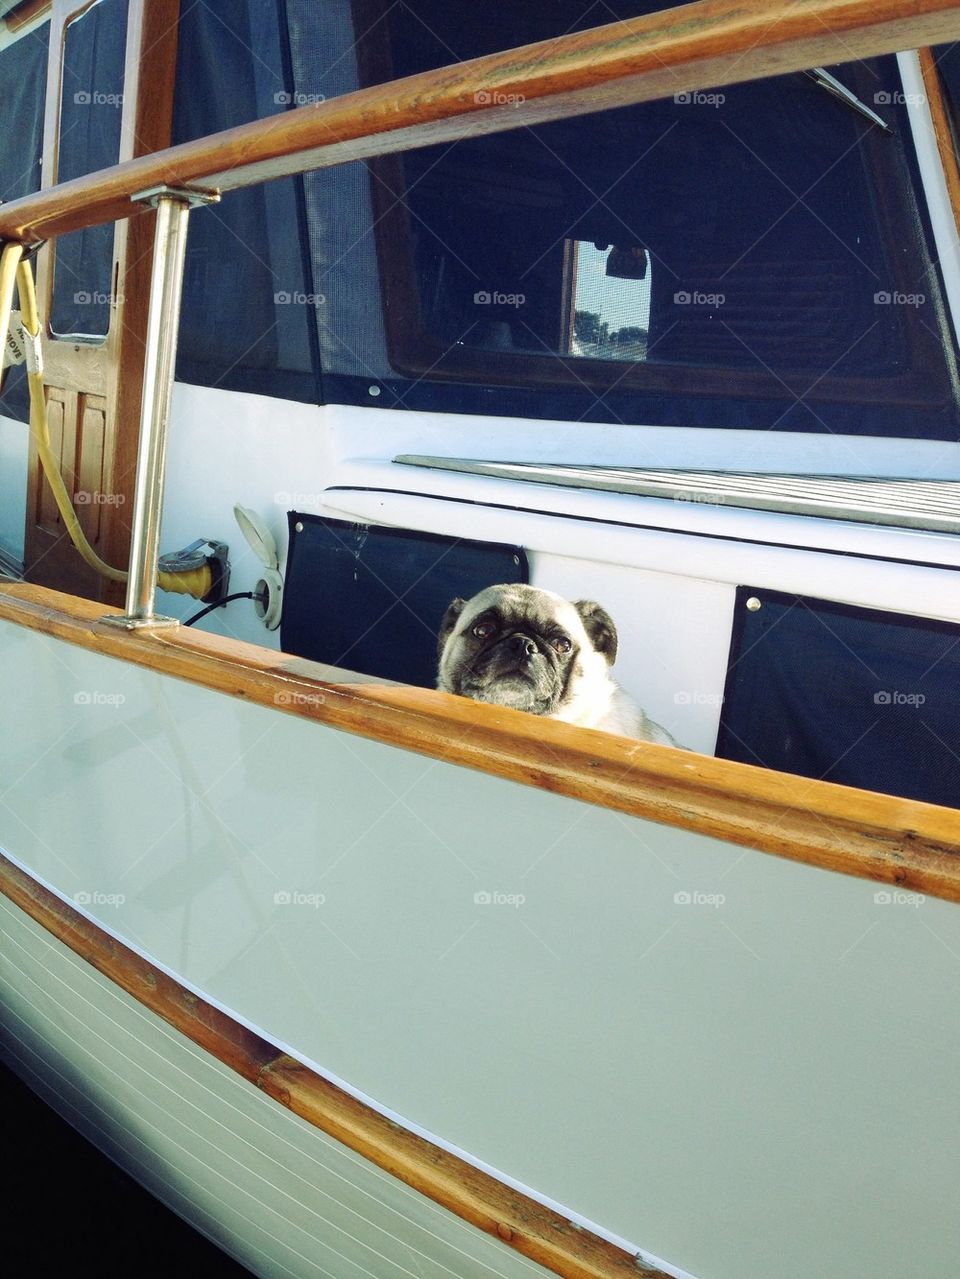 Pug on a boat 